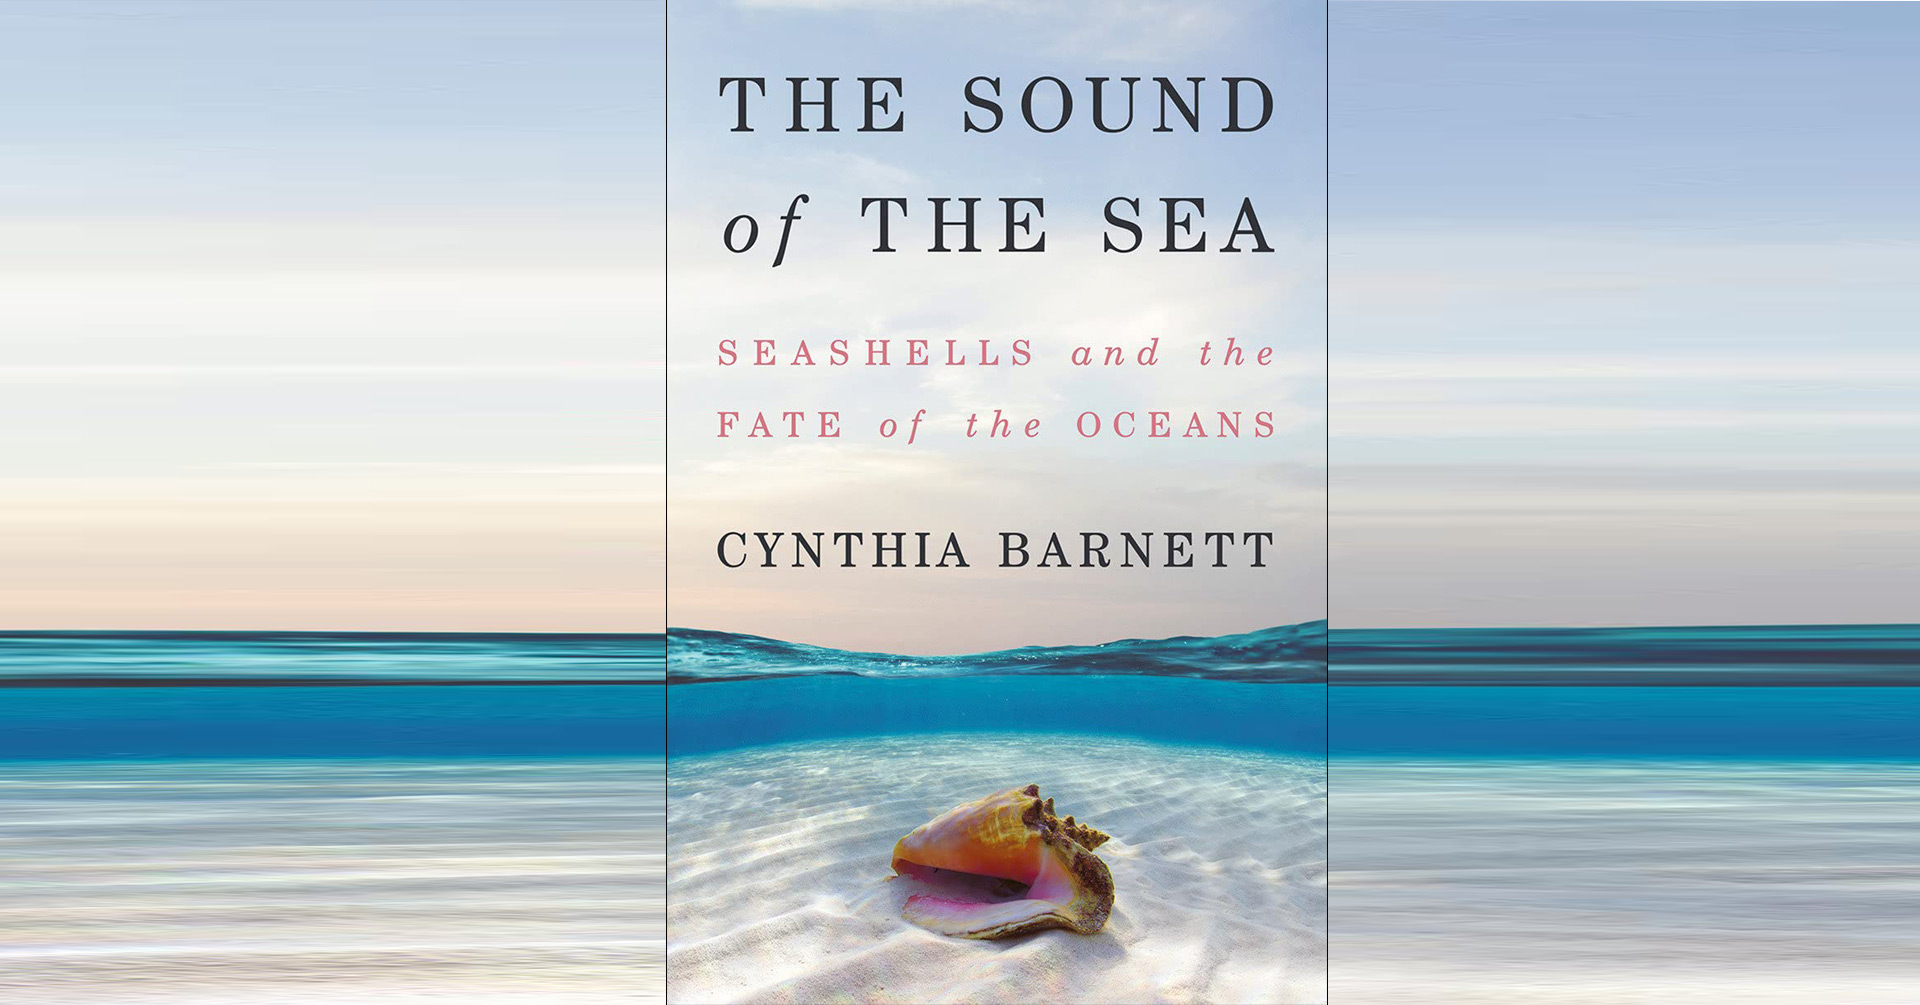 Book cover that reads "The Sound of the Sea" by Cynthia Barnett with a shell sitting on white sand